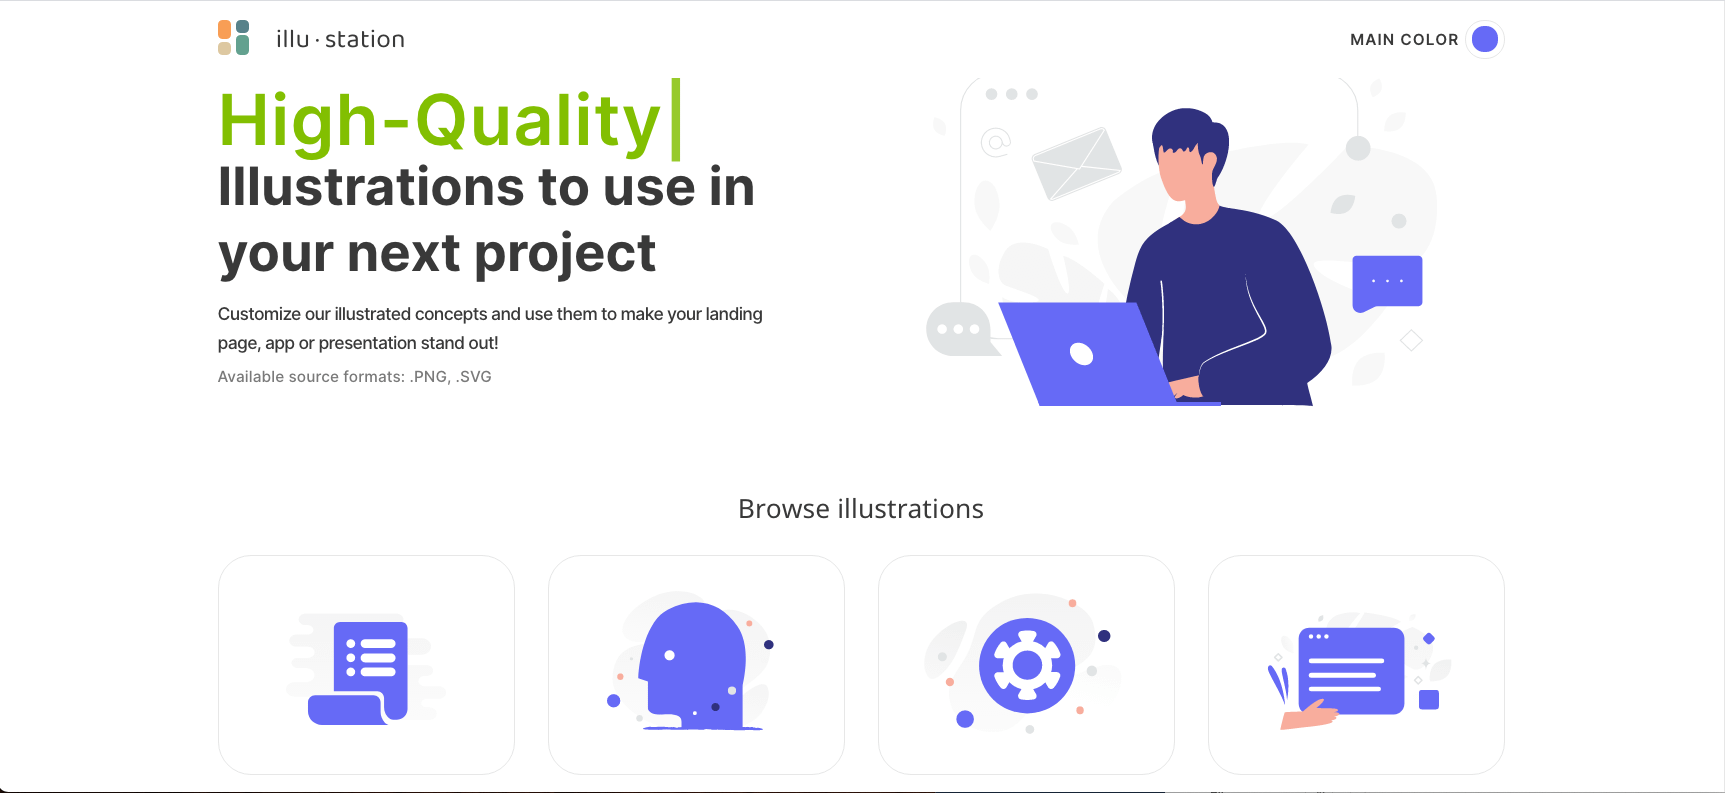 Illu-station is a great tools for finding high-quality, free illustrations for your projects